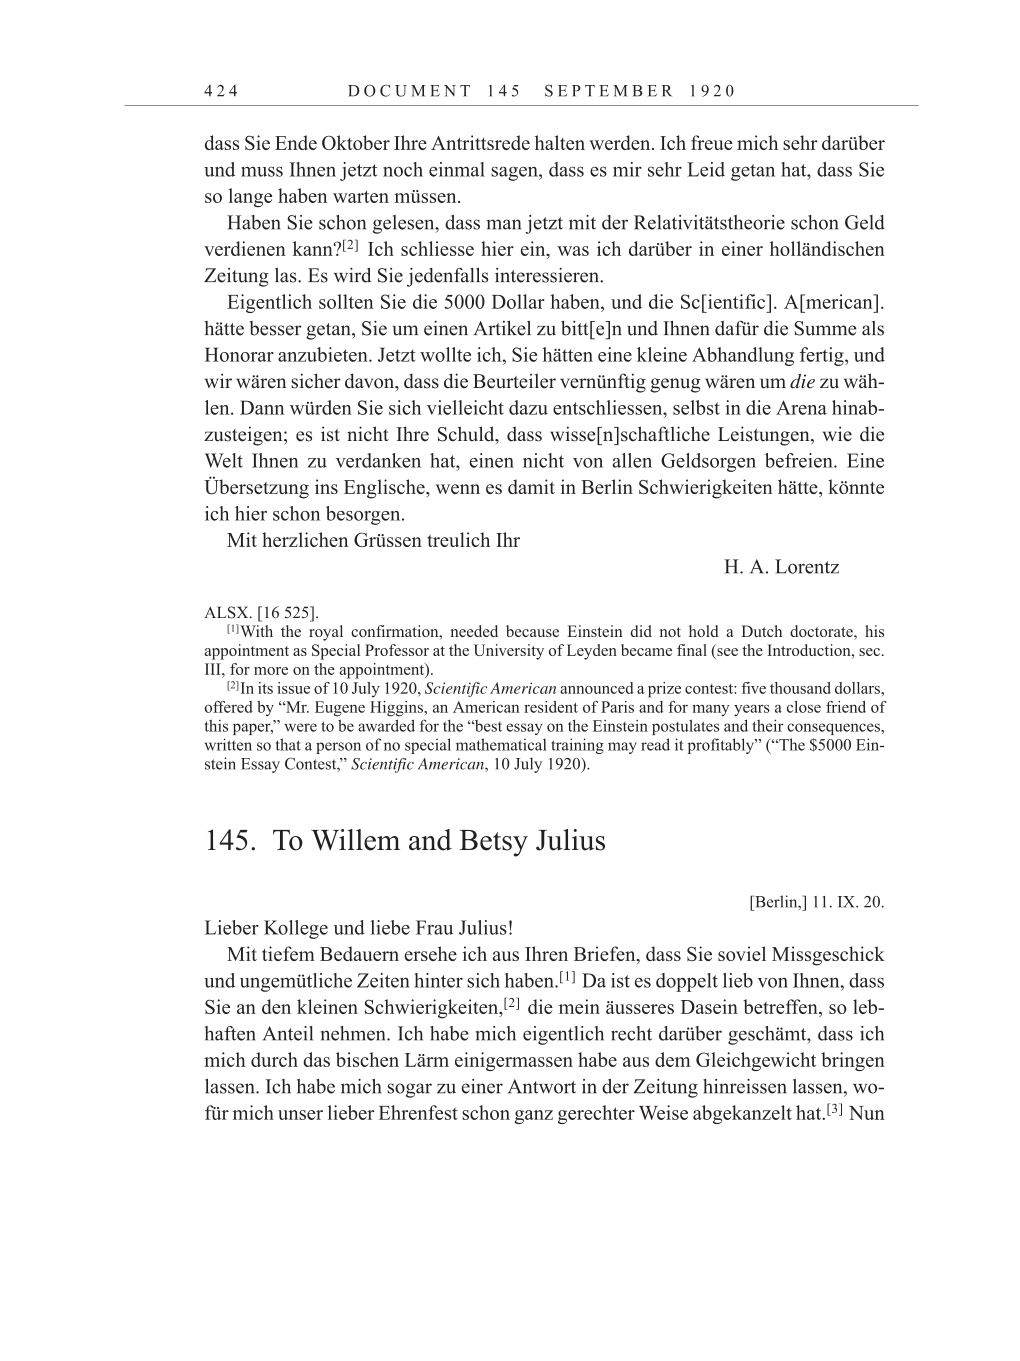 Volume 10: The Berlin Years: Correspondence May-December 1920 / Supplementary Correspondence 1909-1920 page 424